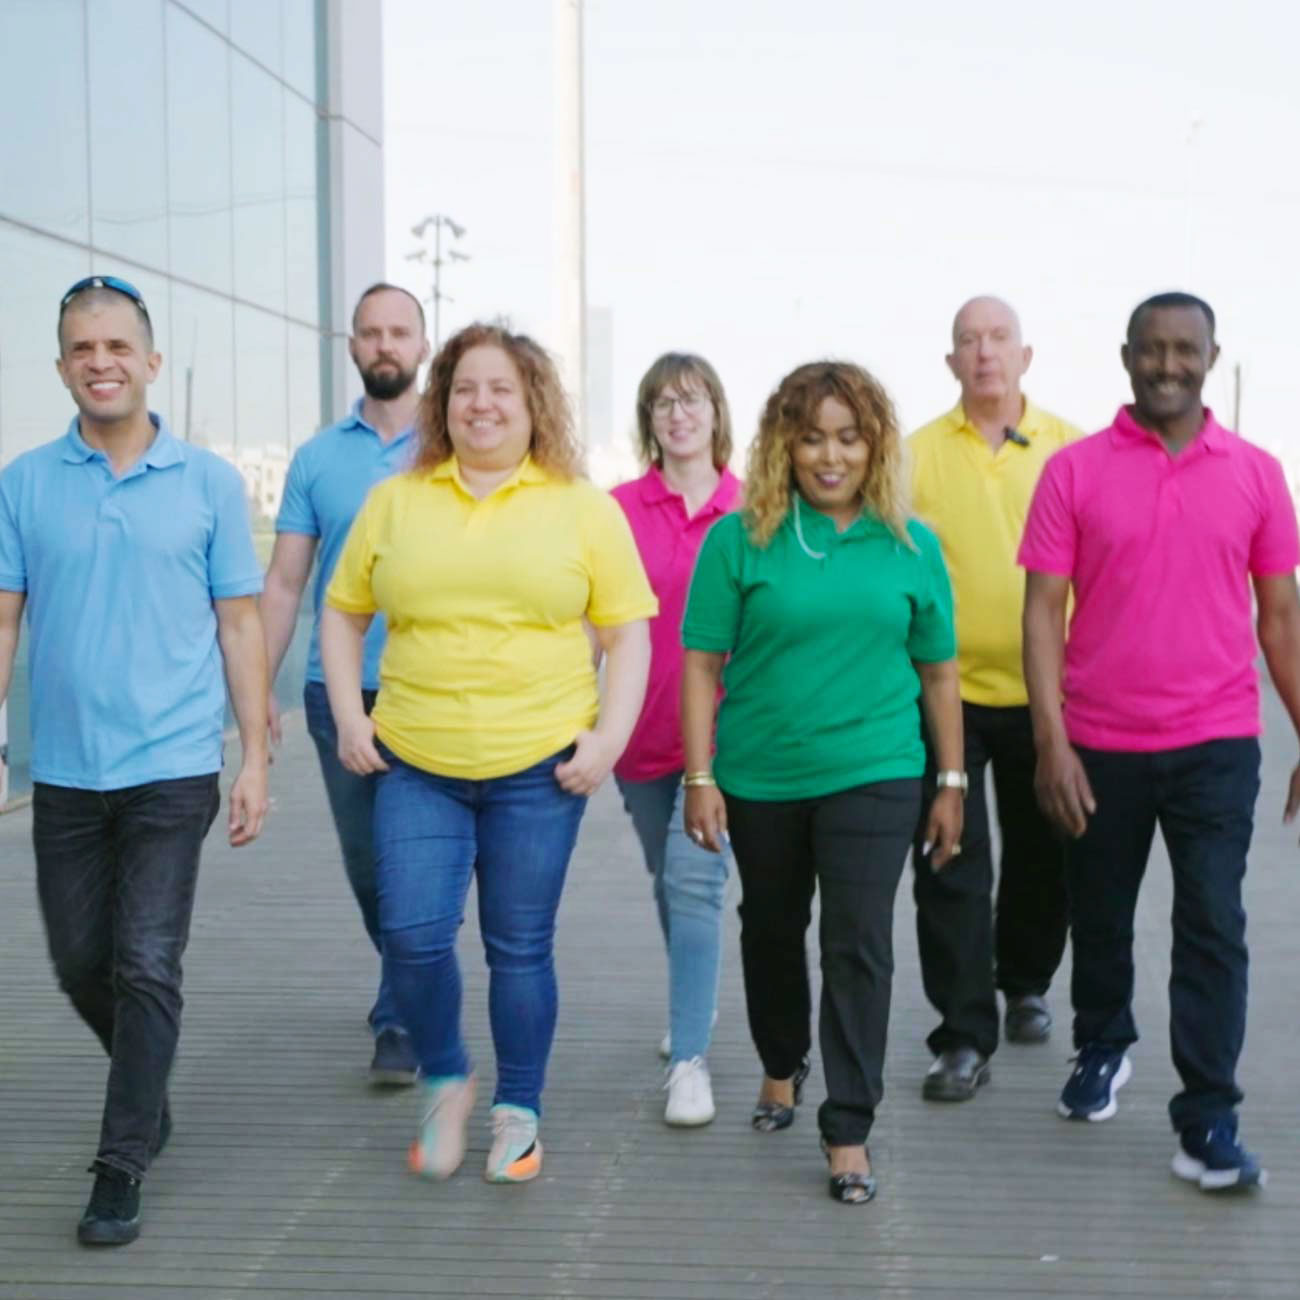 Electra FM employees march together in colorful polo shirts